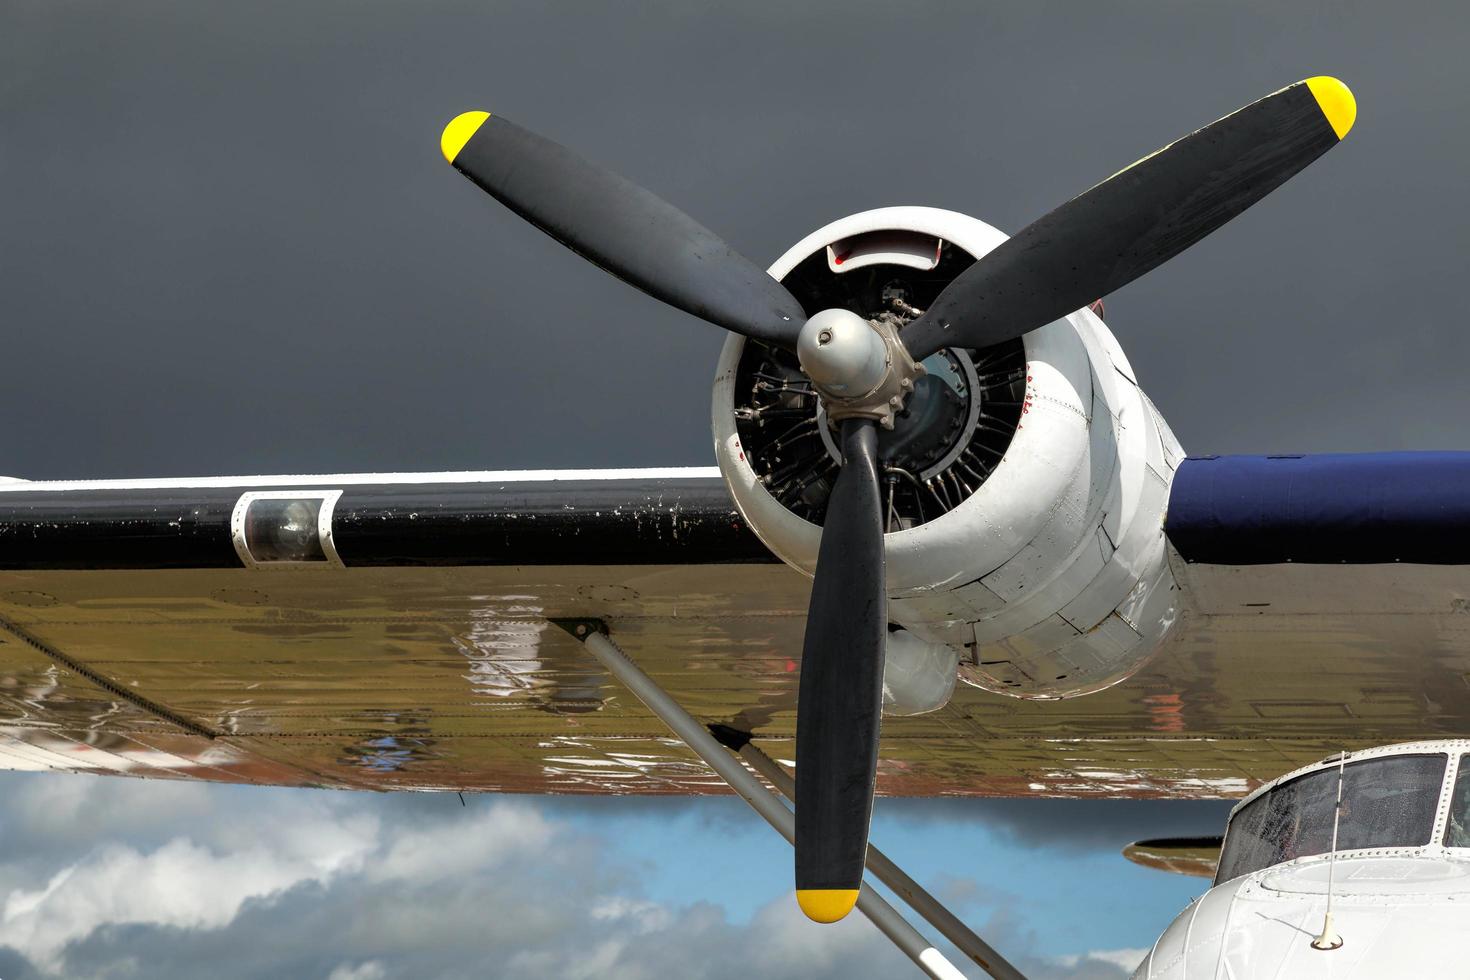 Goodwood, West Sussex, UK, 2012. Close-up of a Catalina Flying Boat photo